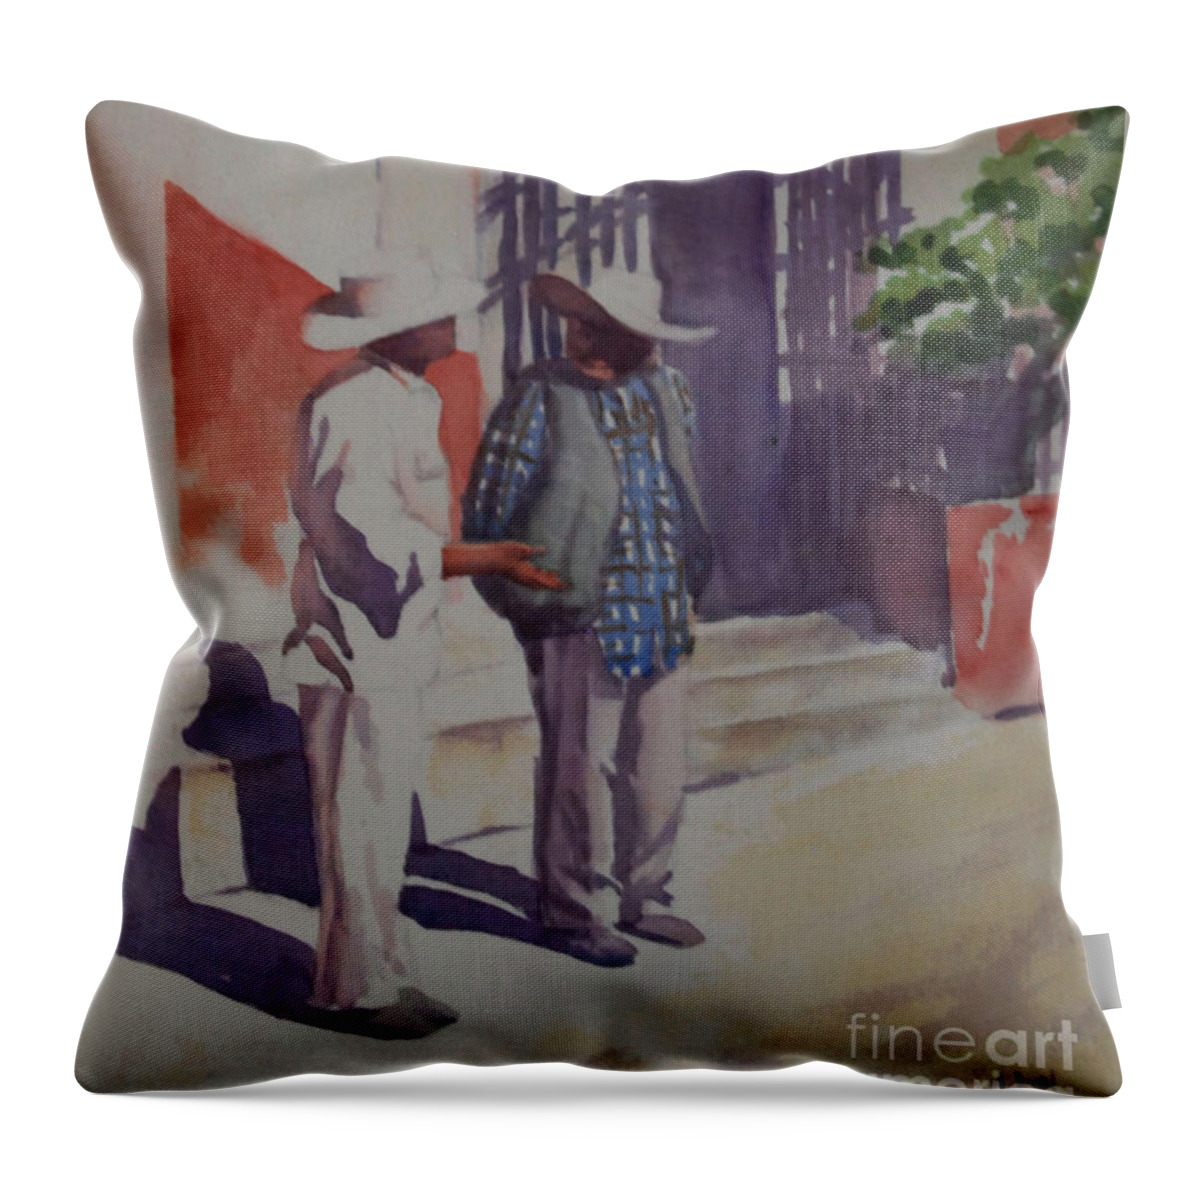 Men Throw Pillow featuring the painting The Conversation by Heidi E Nelson